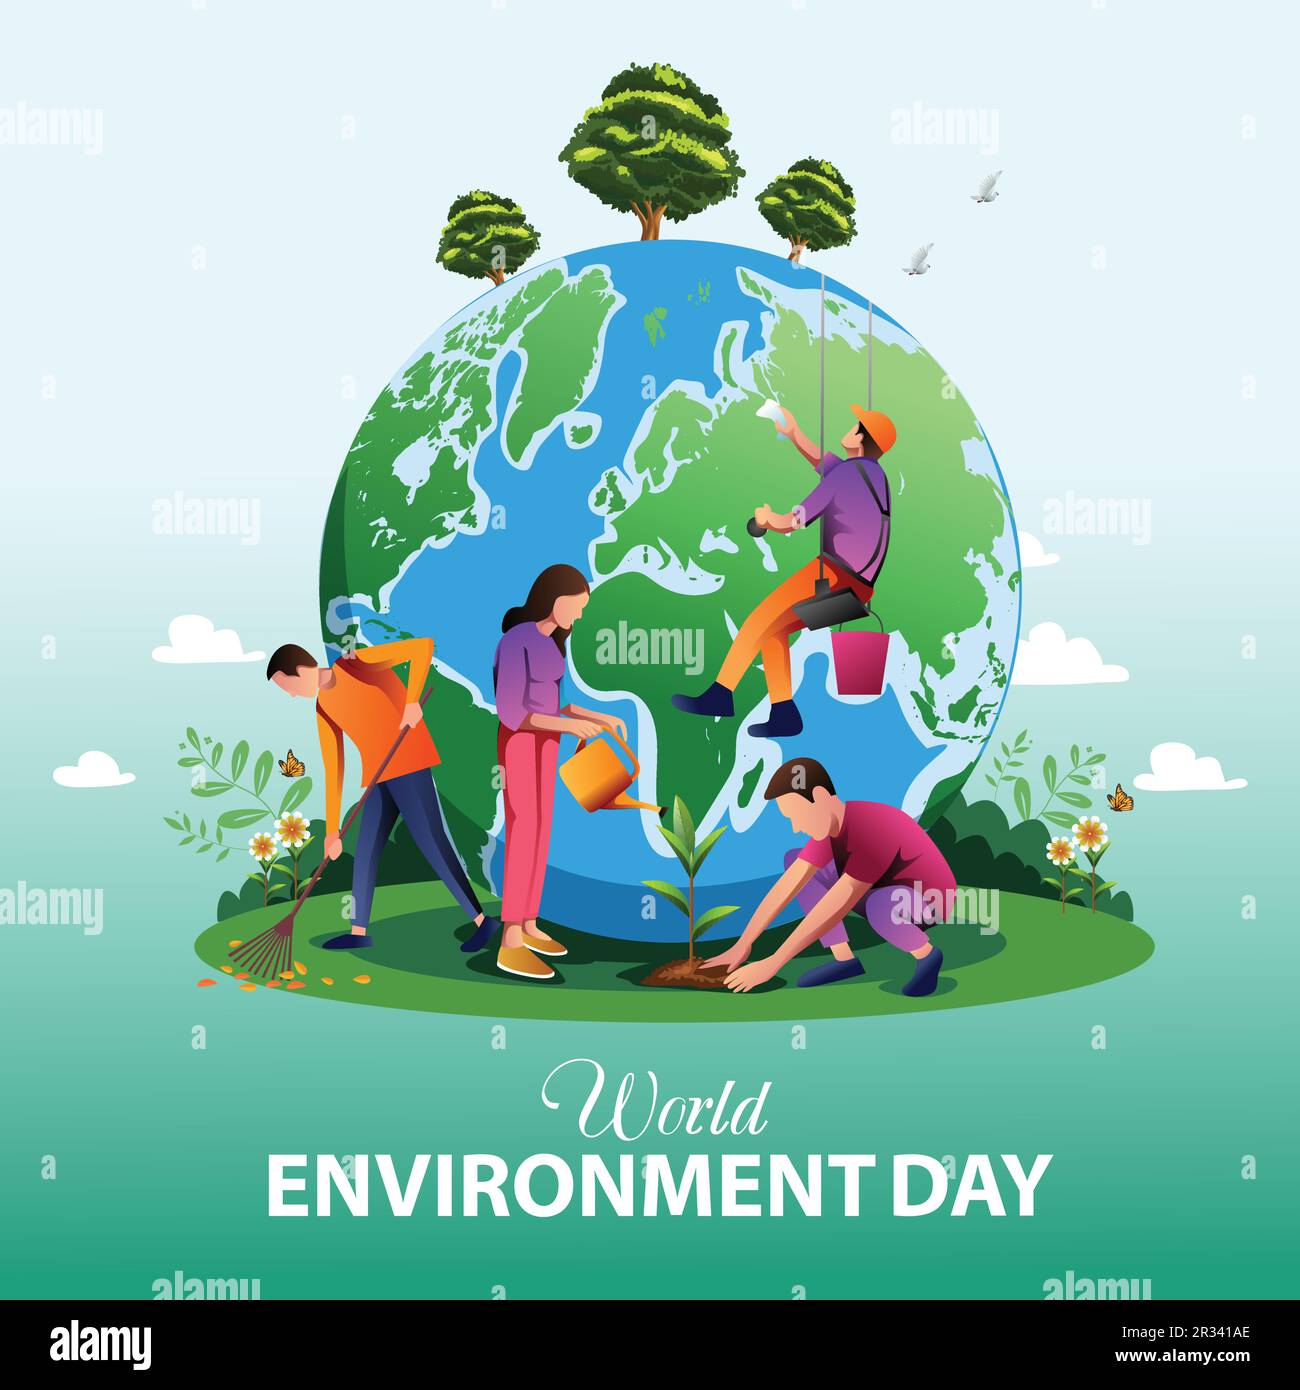 save earth poster tutorial save earth save environment drawing Archives -  FREE CHAT ROOMS